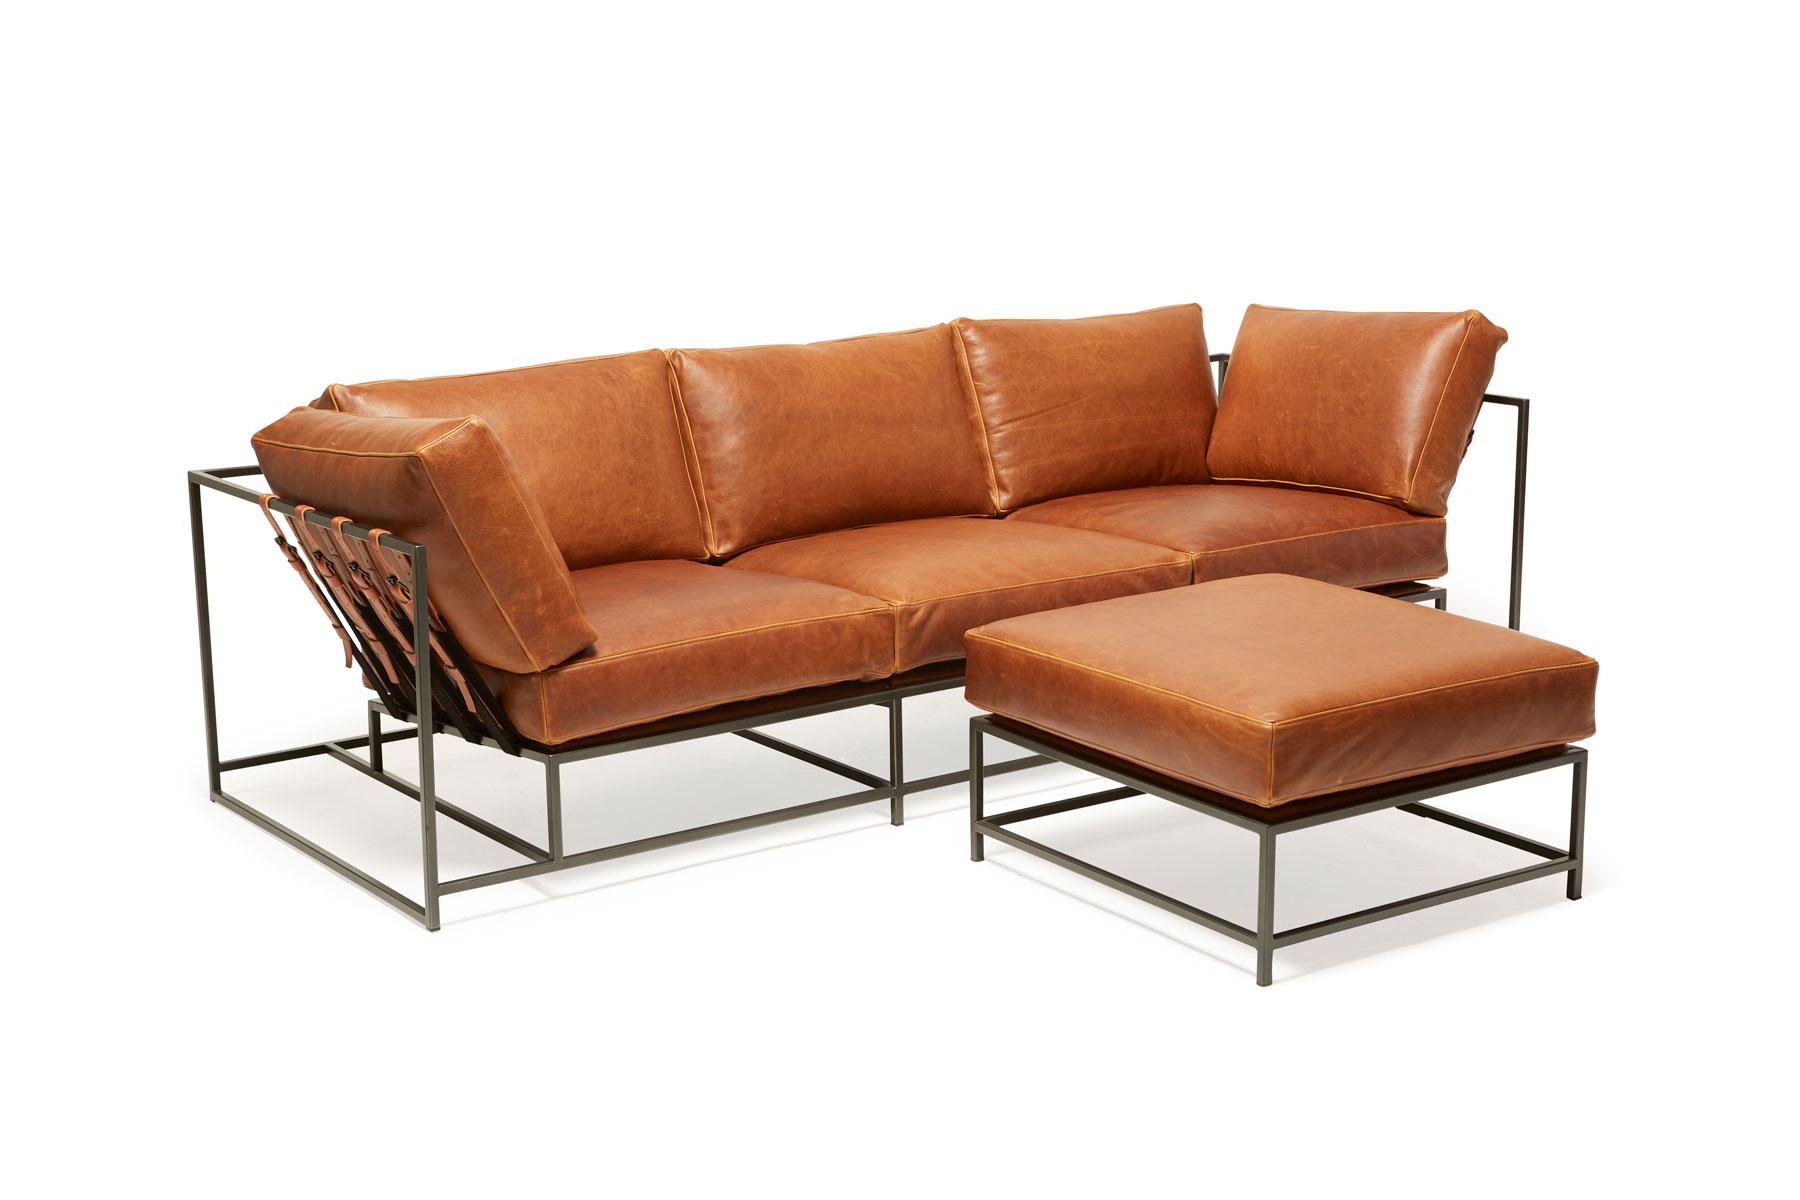 Potomac Tan Leather and Blackened Steel Sofa with Ottoman In New Condition For Sale In Los Angeles, CA